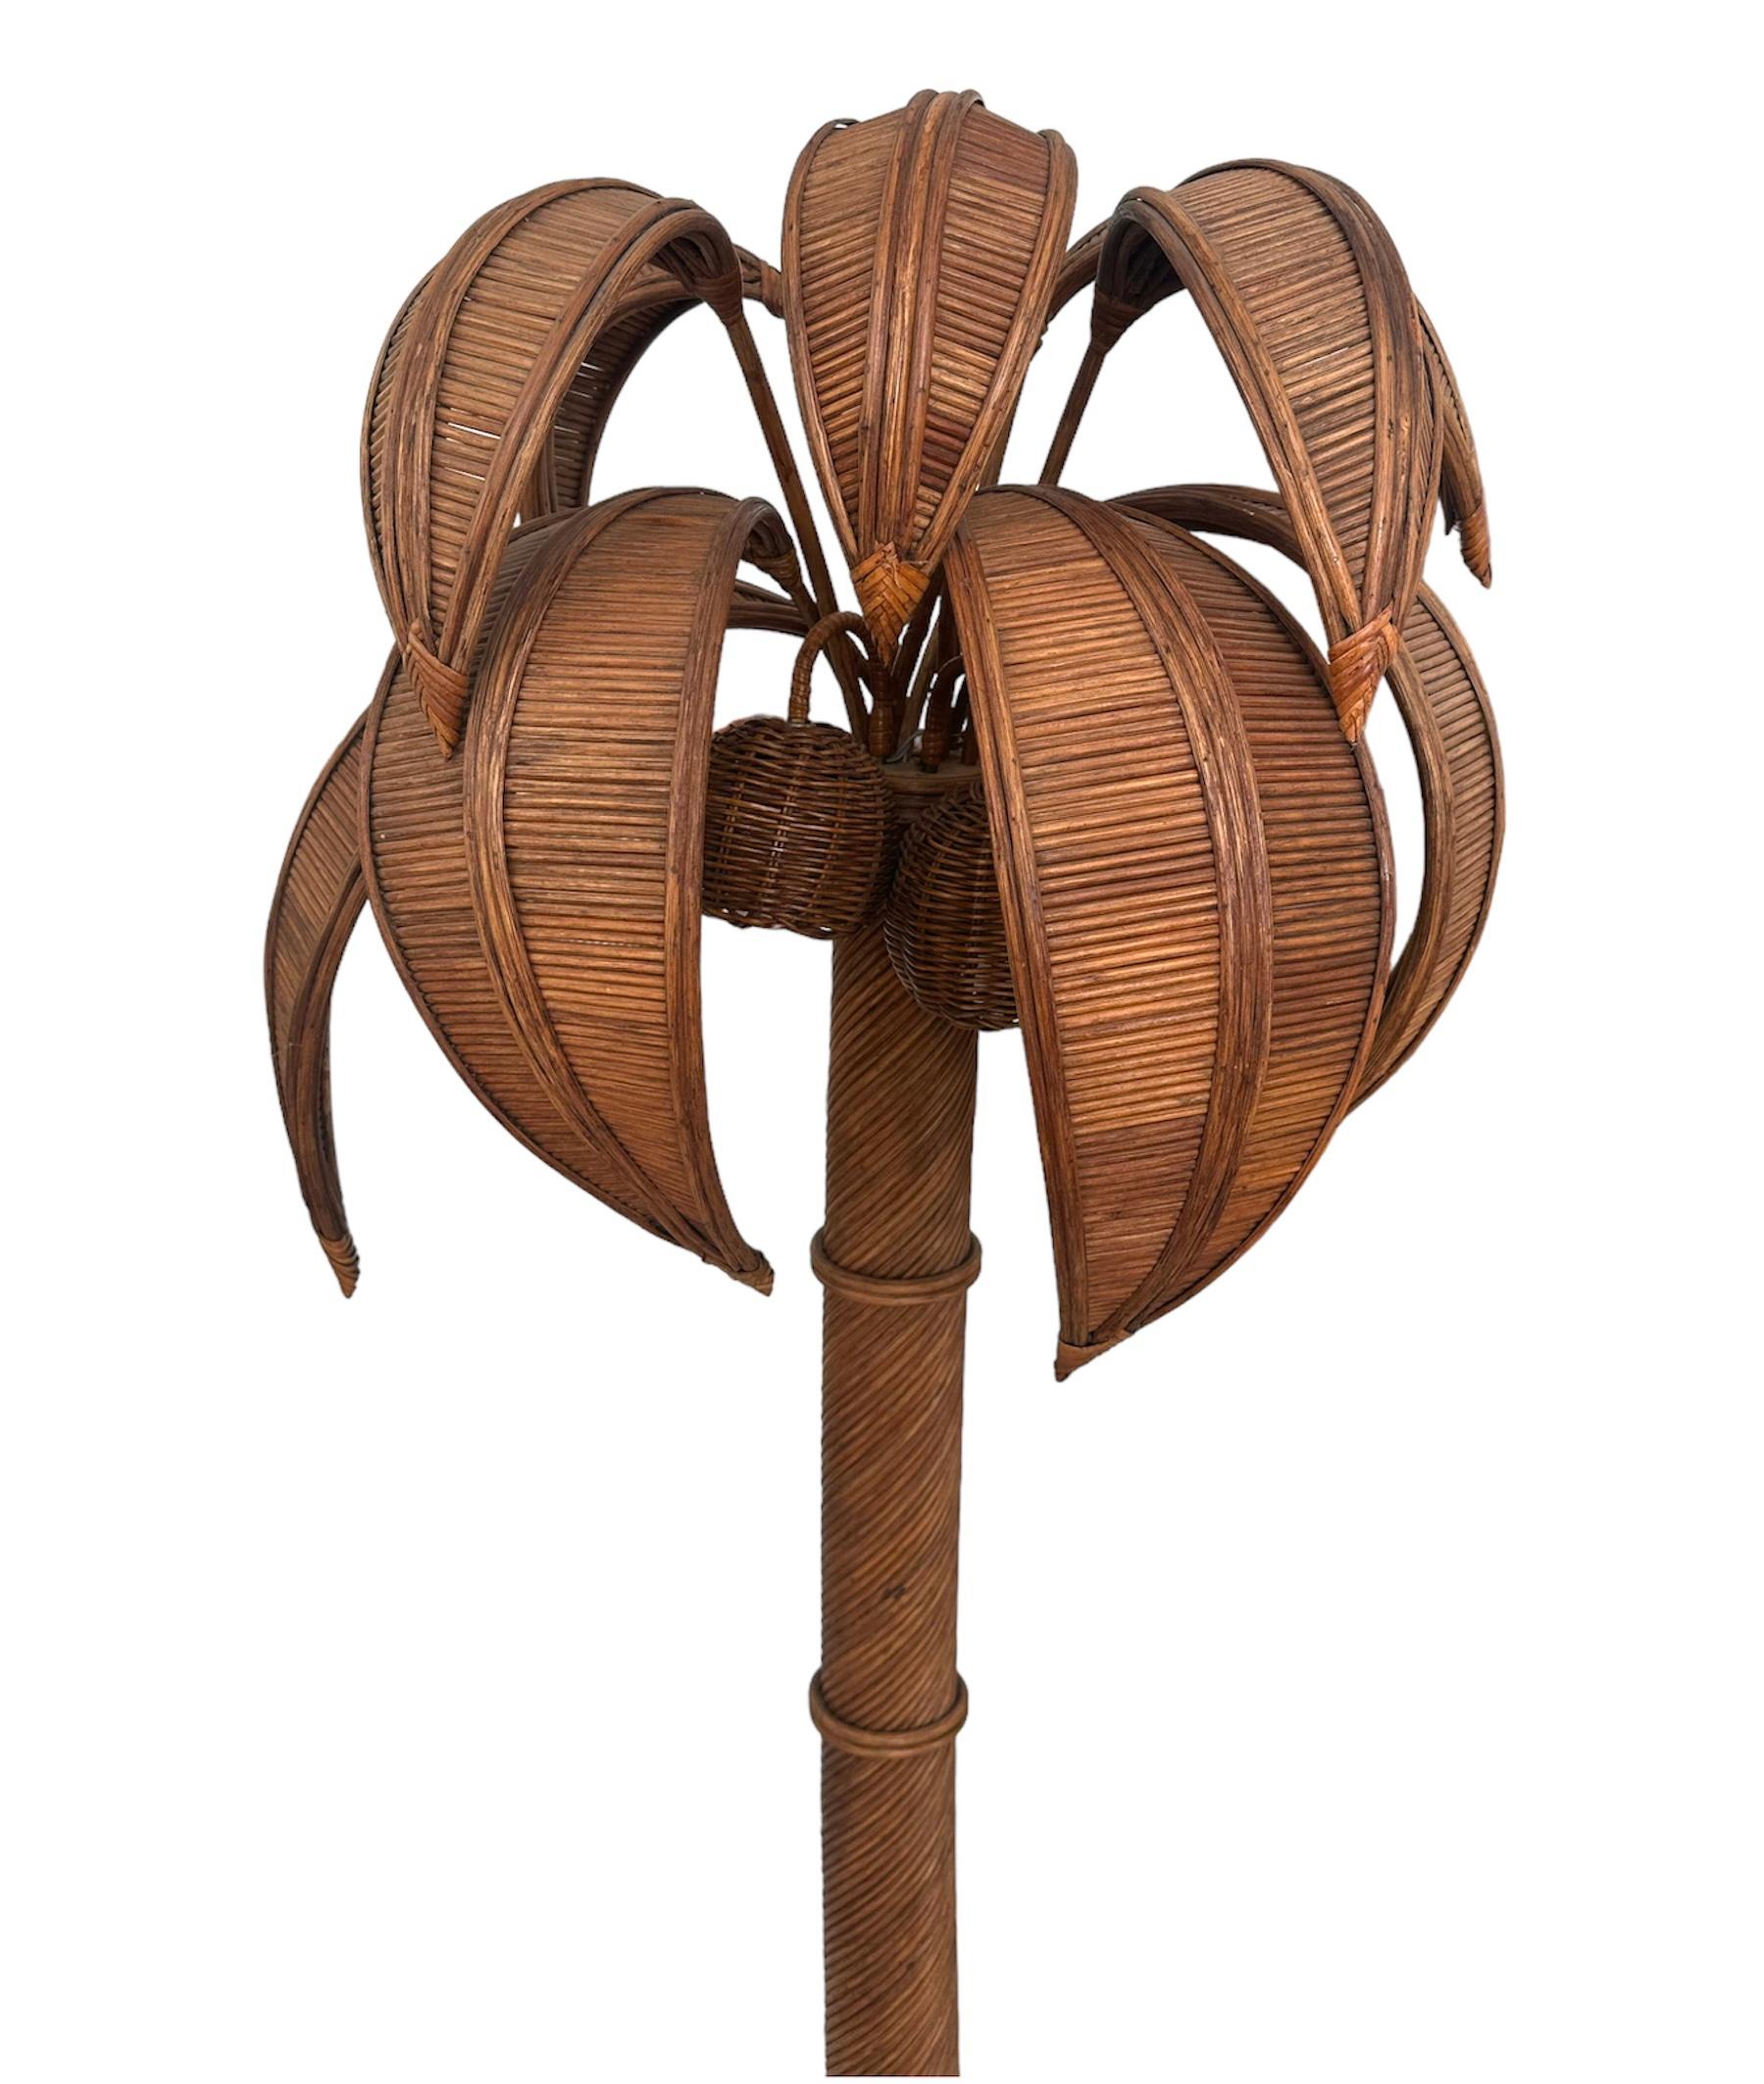 Palm tree floor lamp by Mario Lopez Torres, 1970

Impressive floor light designed by mexican artist Mario Lopez Torres well known for his sculptural wicker creations in the 1970ties which were sold by selected galleries in Europe and the US.